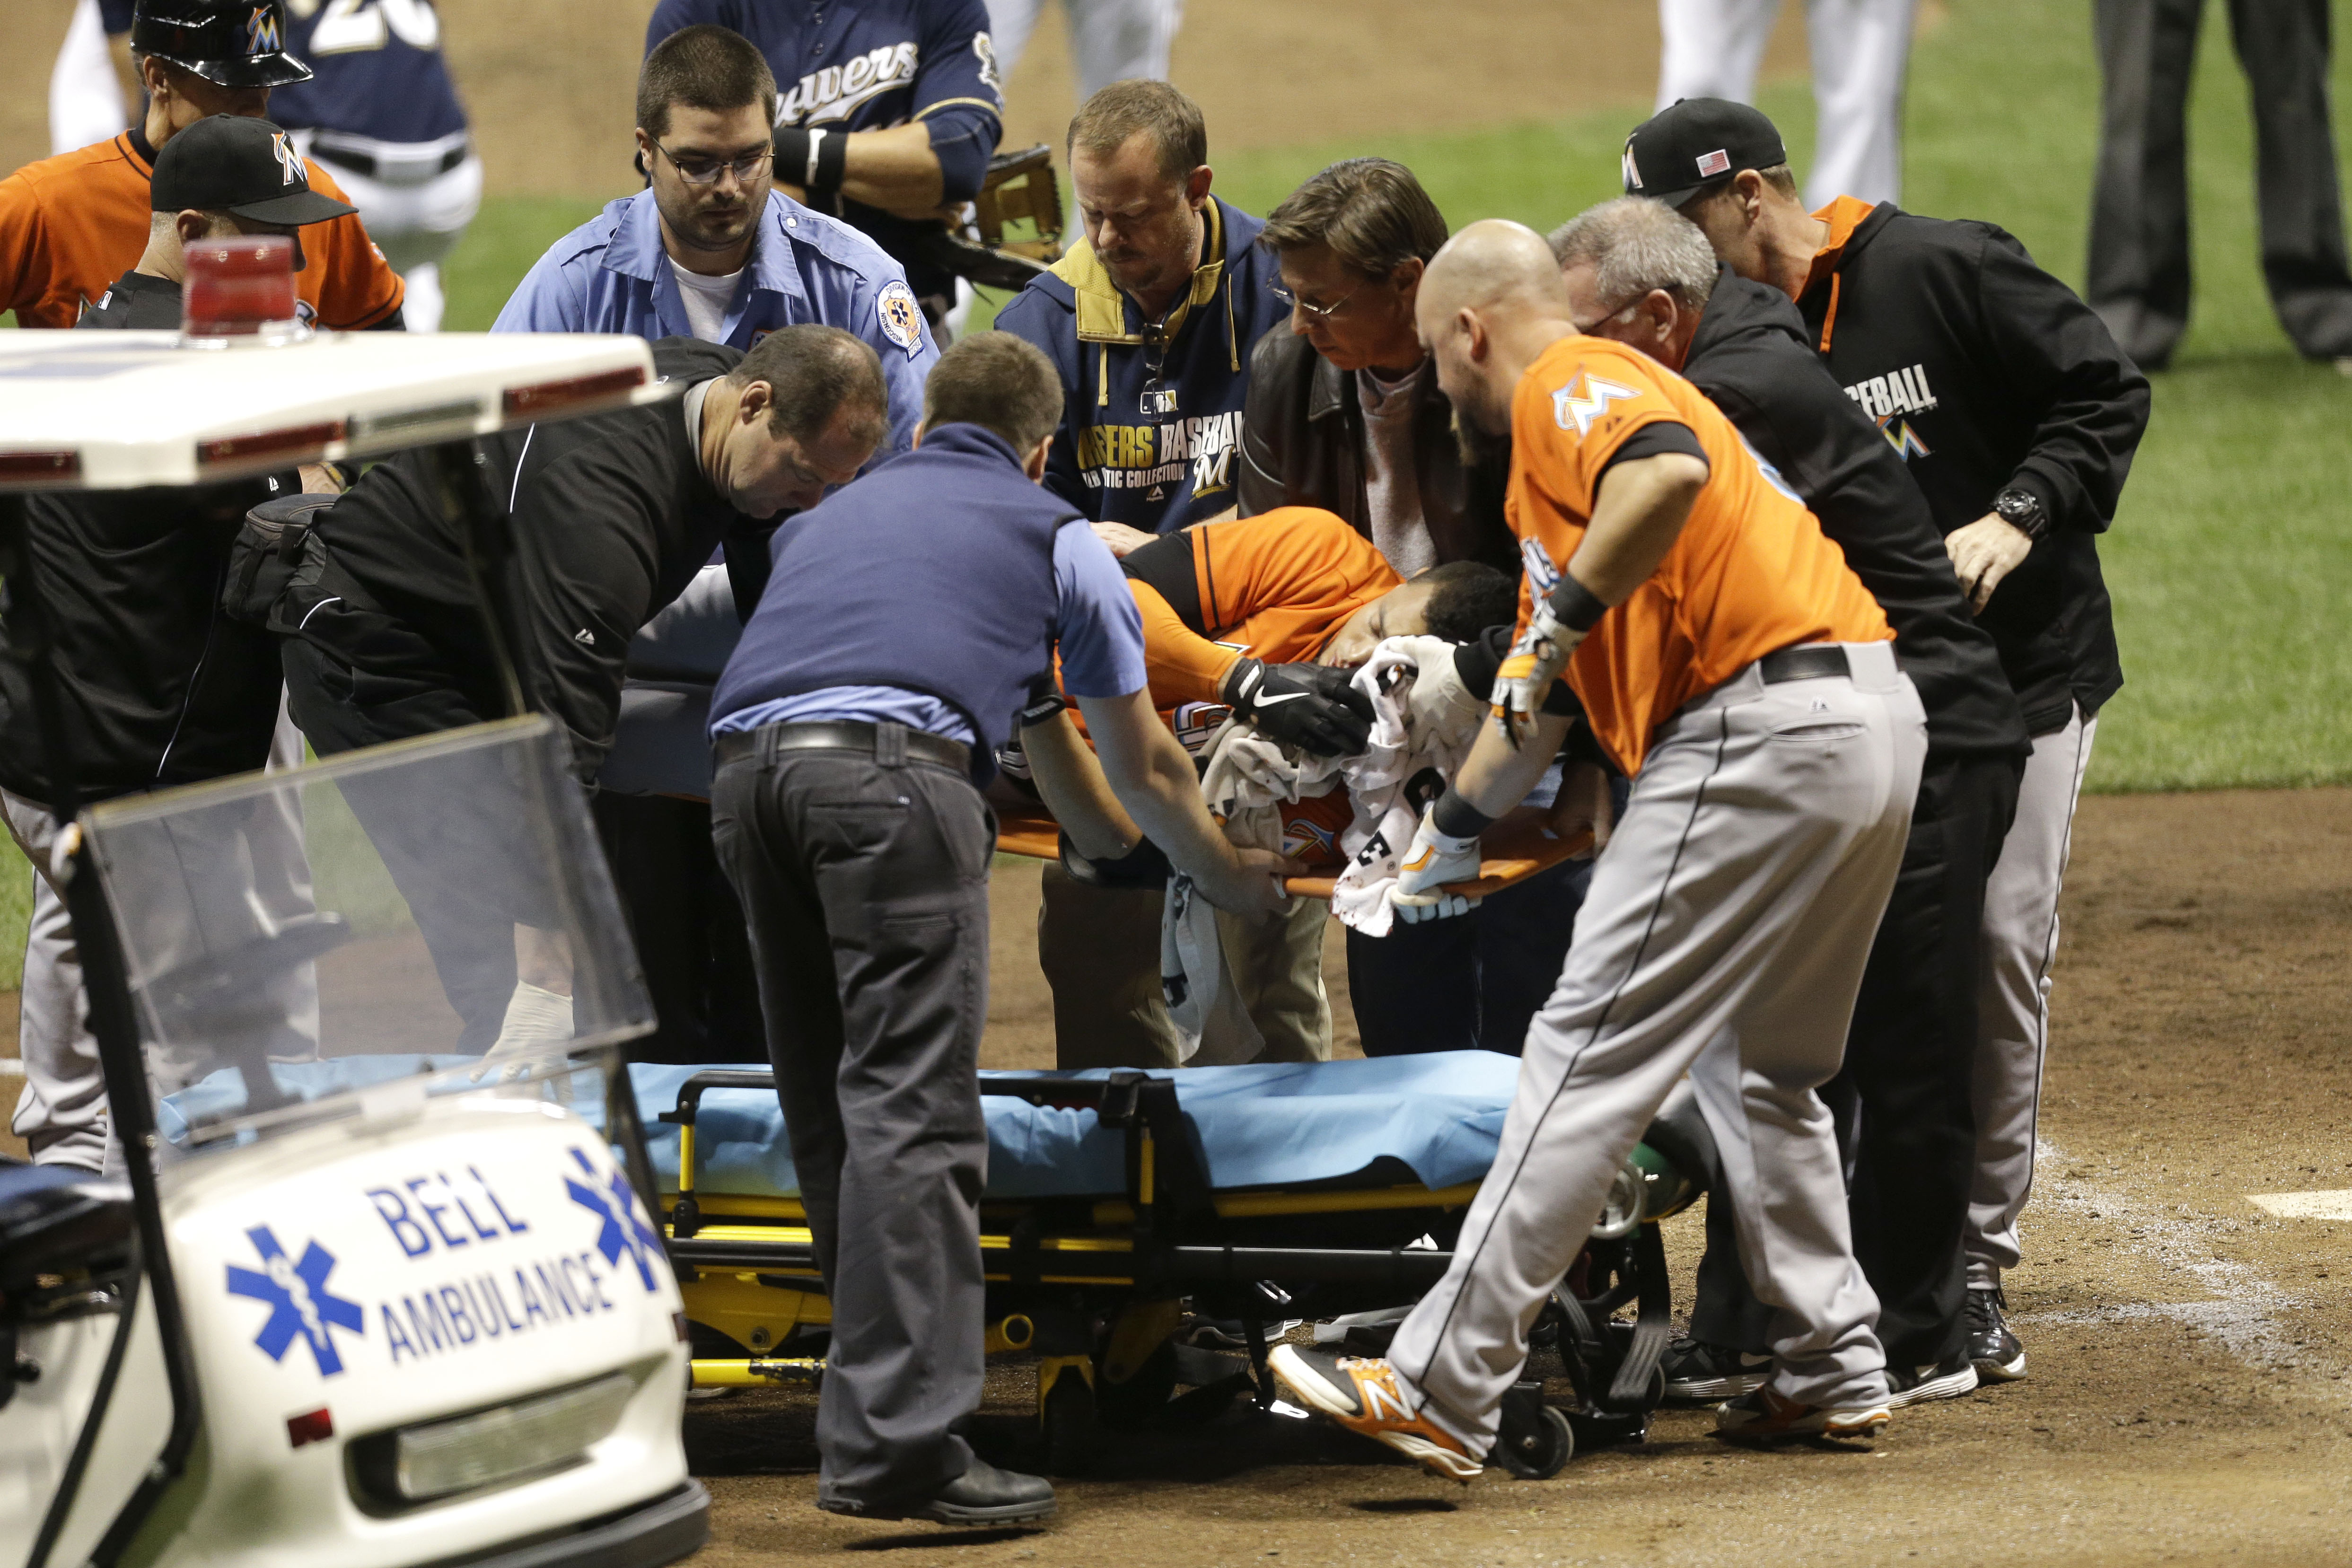 Giancarlo Stanton #27 of the Miami Marlins is lifted onto a stretcher after getting hit by a pitch from Mike Fiers of the Milwaukee Brewers during the top of the fifth inning at Miller Park on September 11, 2014 in Milwaukee, Wisconsin. (Photo by Mike McGinnis/Getty Images)